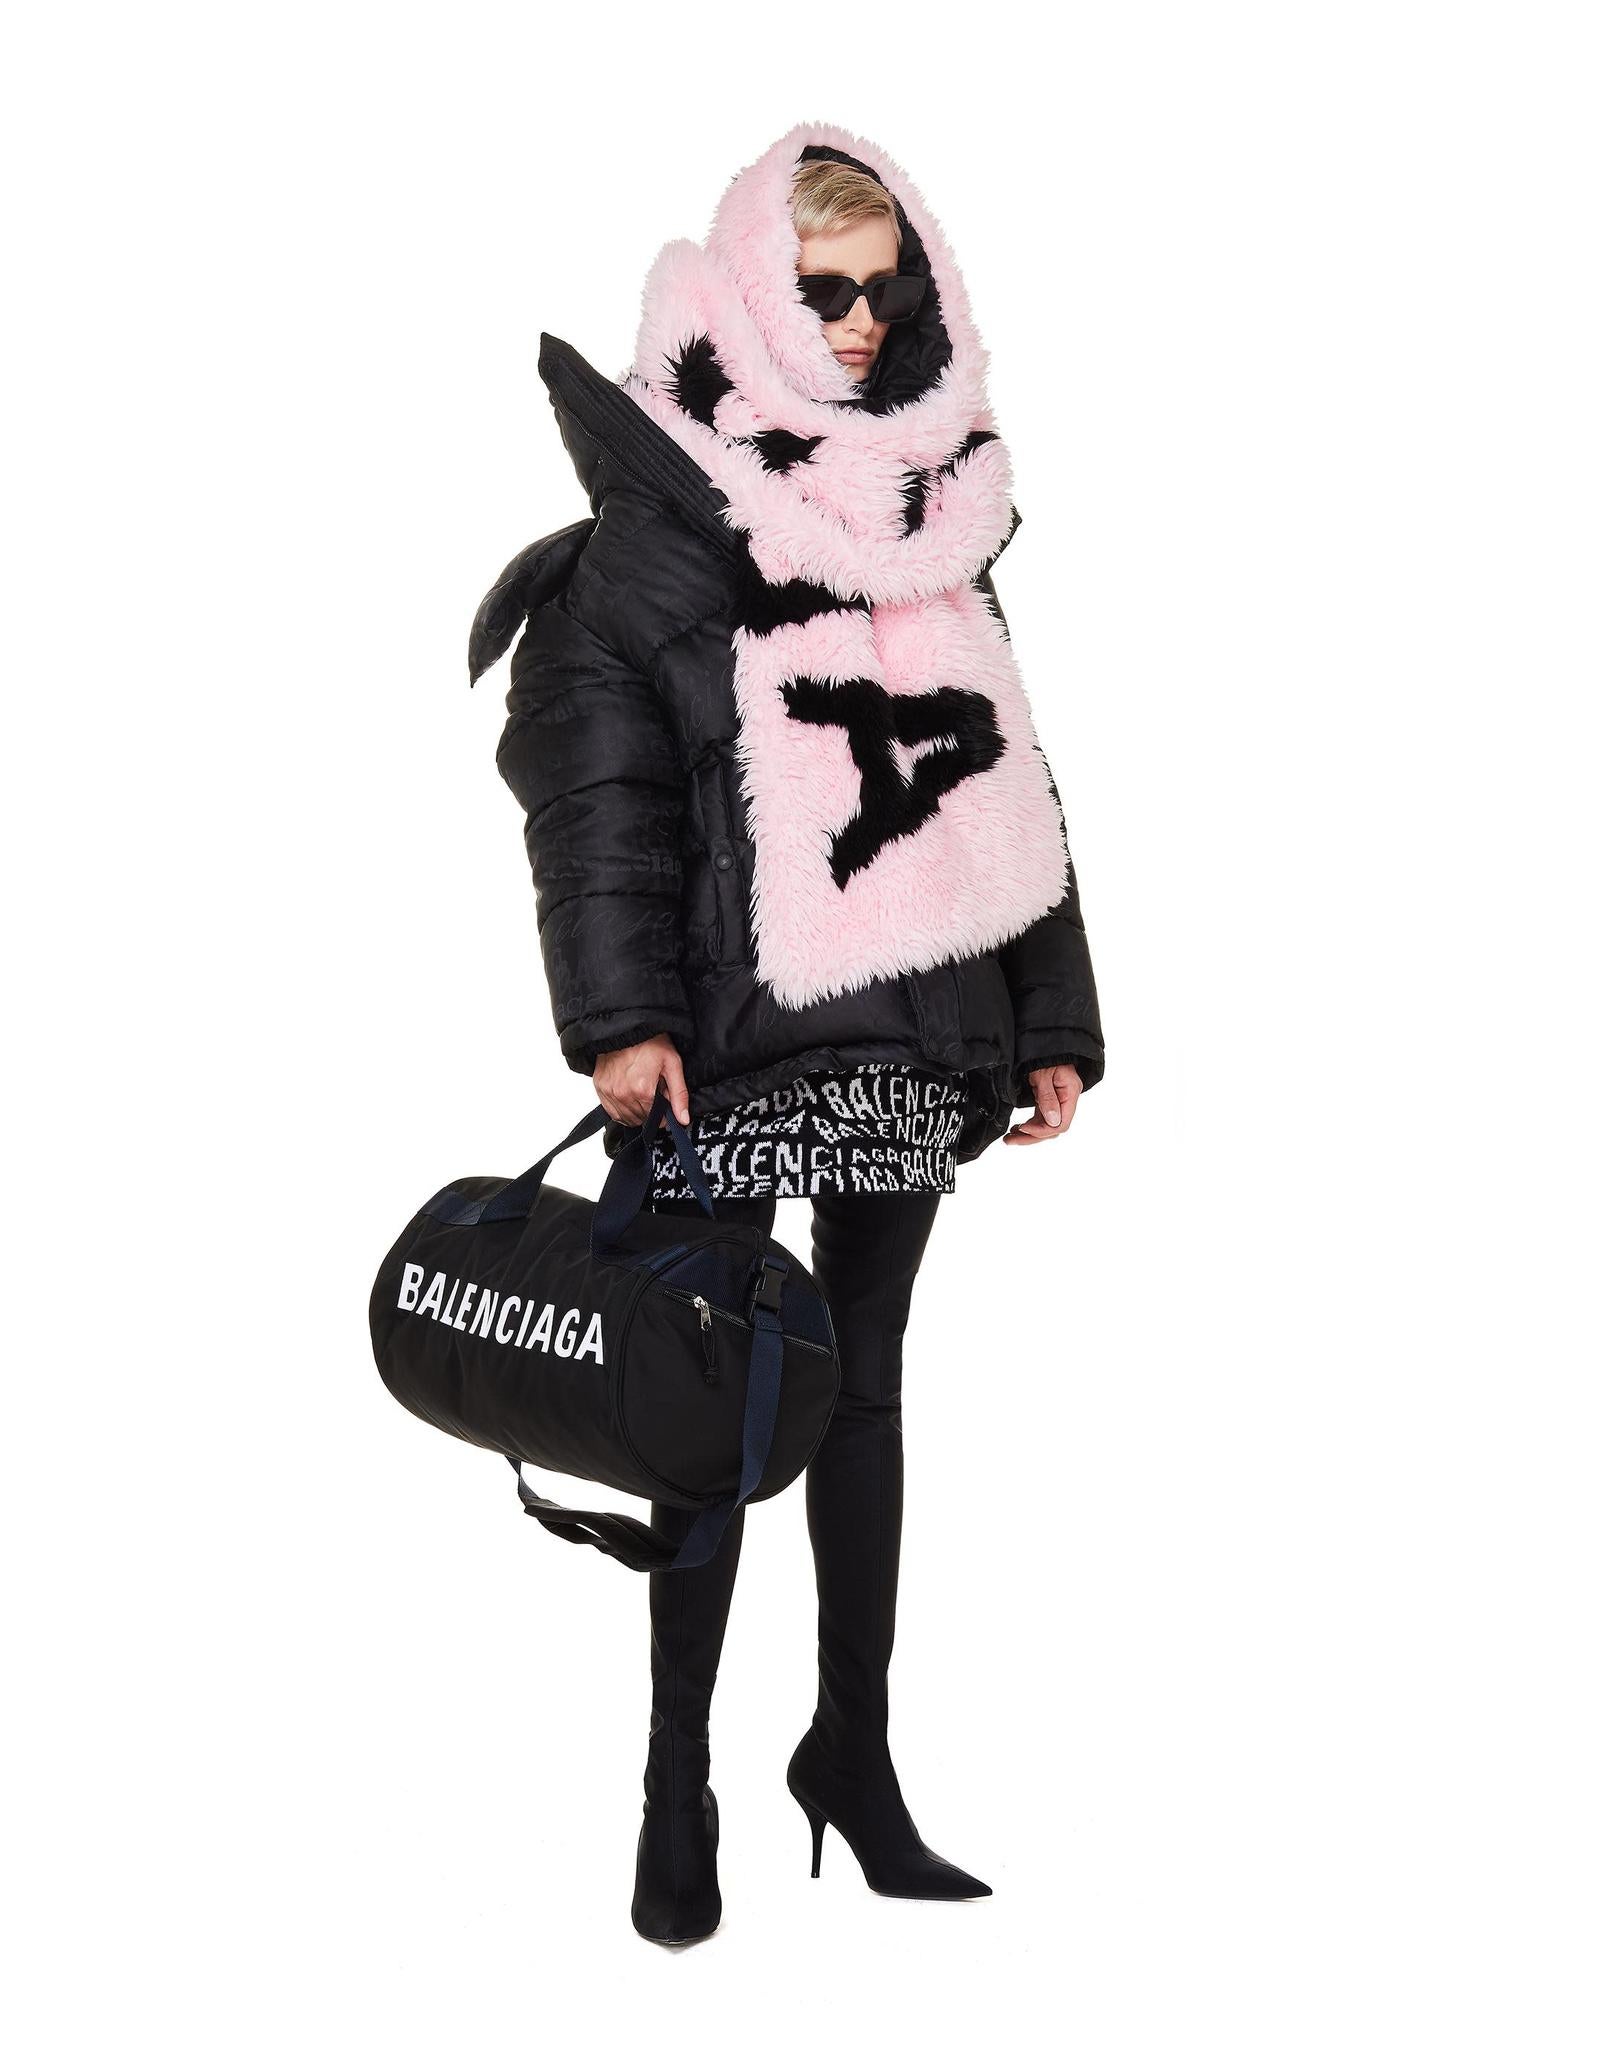 Oversized Balenciaga Faux Fur Logo Scarf, pink with hair plush fabric, two-tone, inner padding. 

COLOR: Pink/black
MATERIAL: 79% Modacrylic, 21% Polyester
ITEM CODE:  46699286EP
MEASURES H 40cm x W